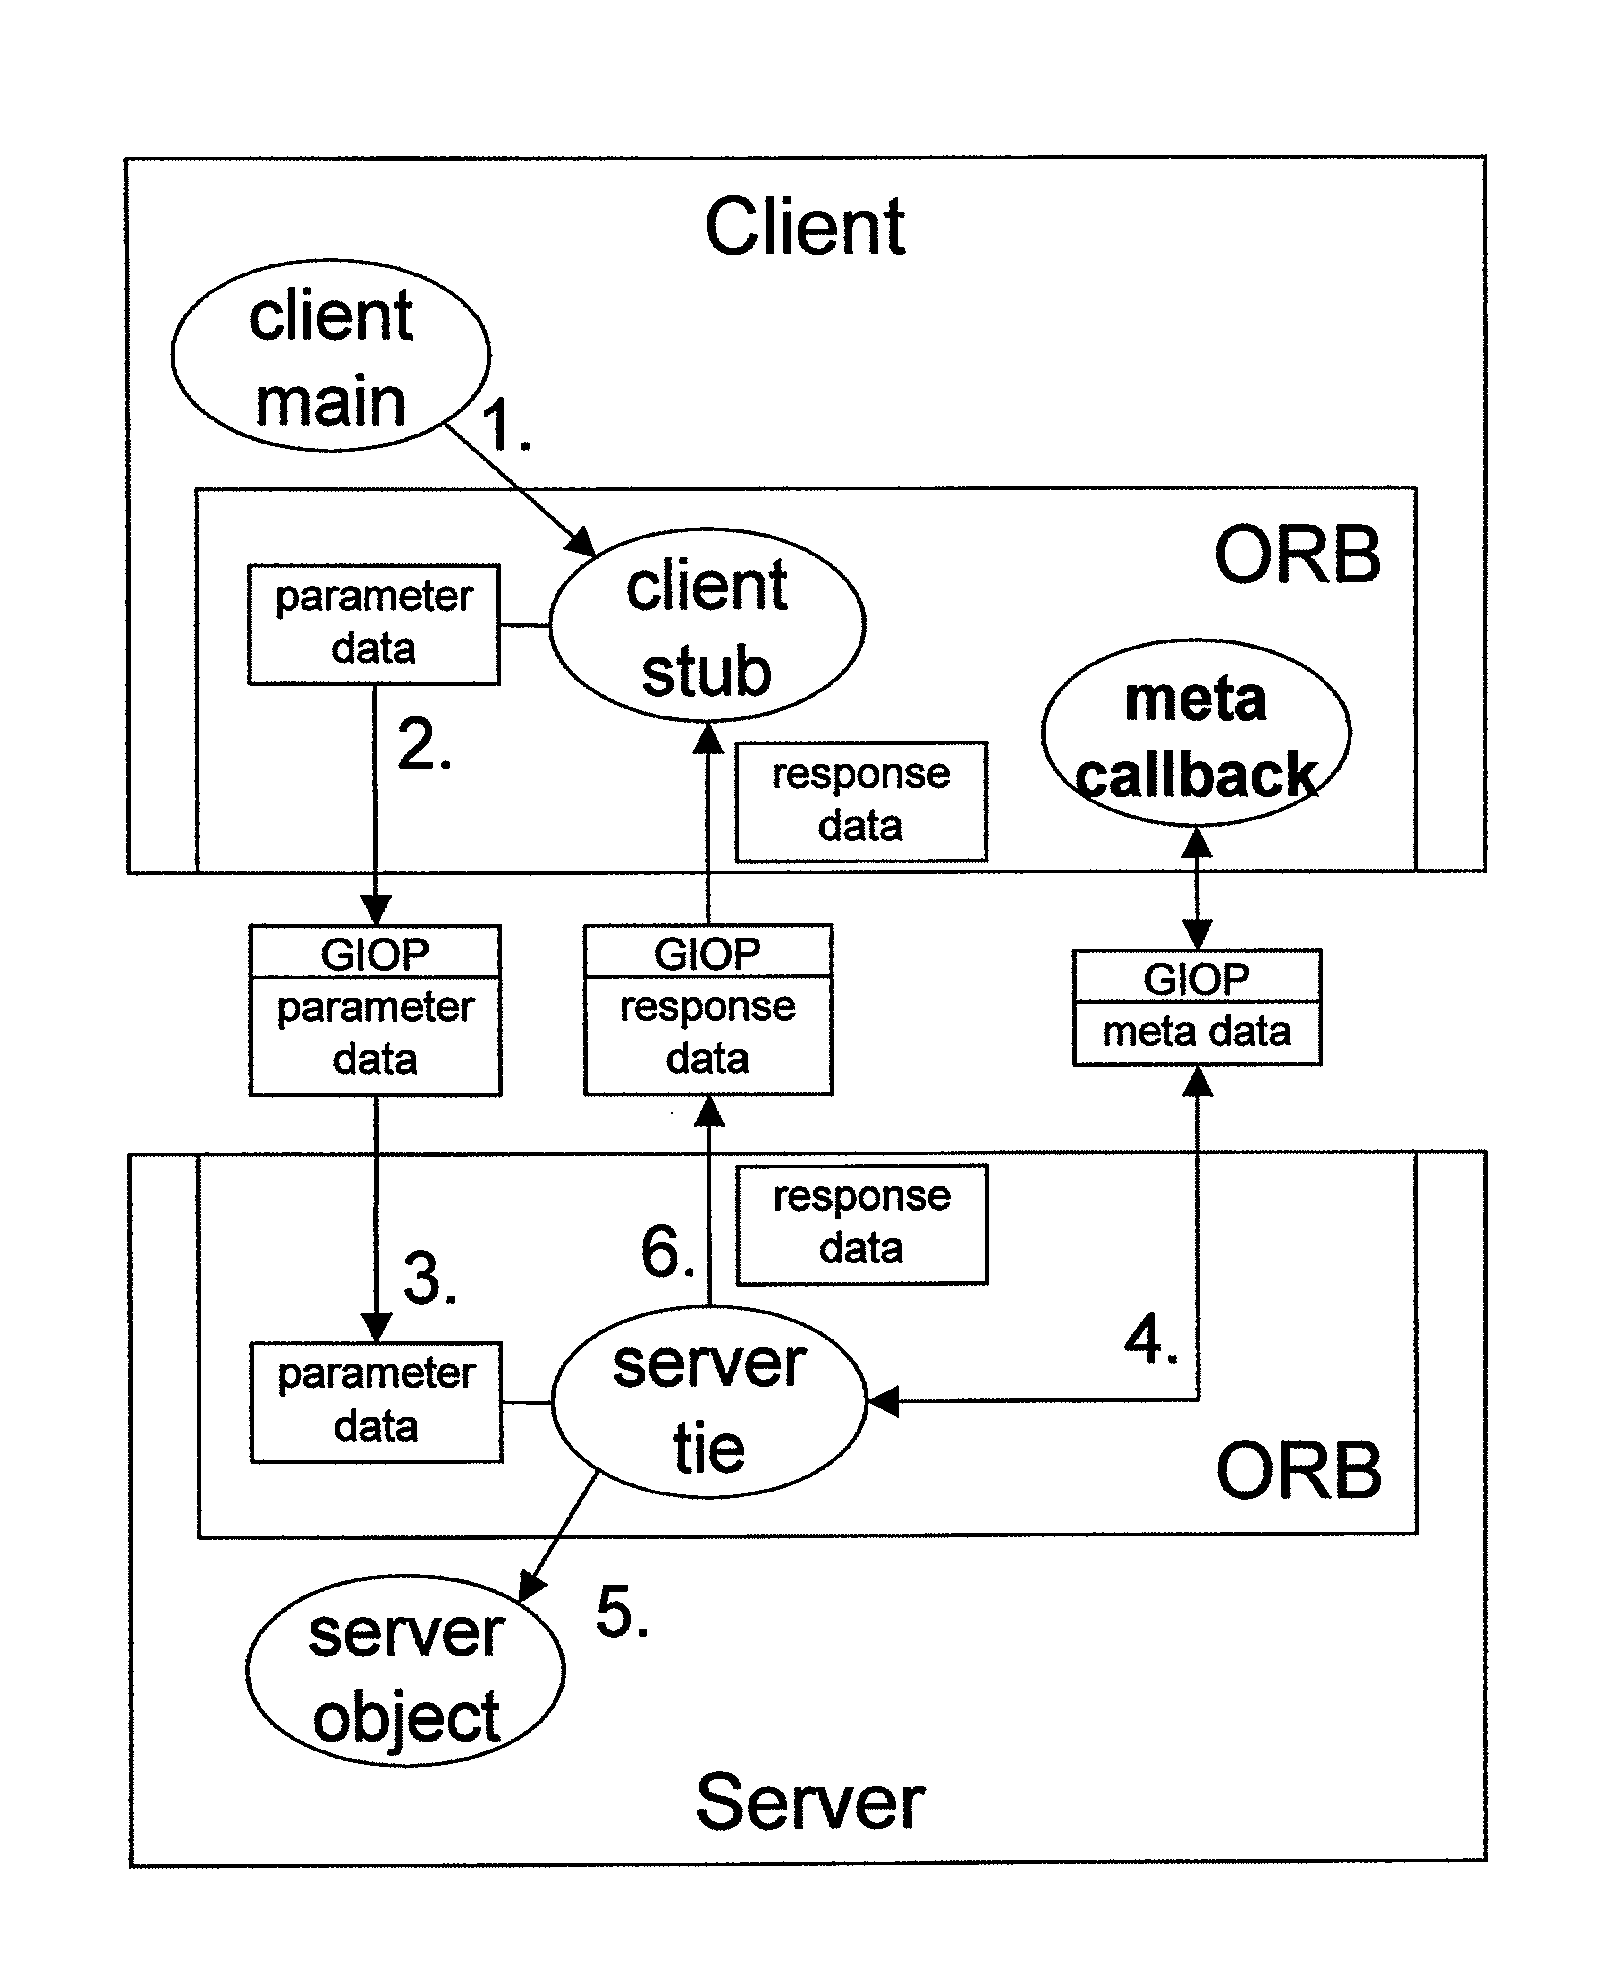 Pre-population of meta data cache for resolution of data marshaling issues